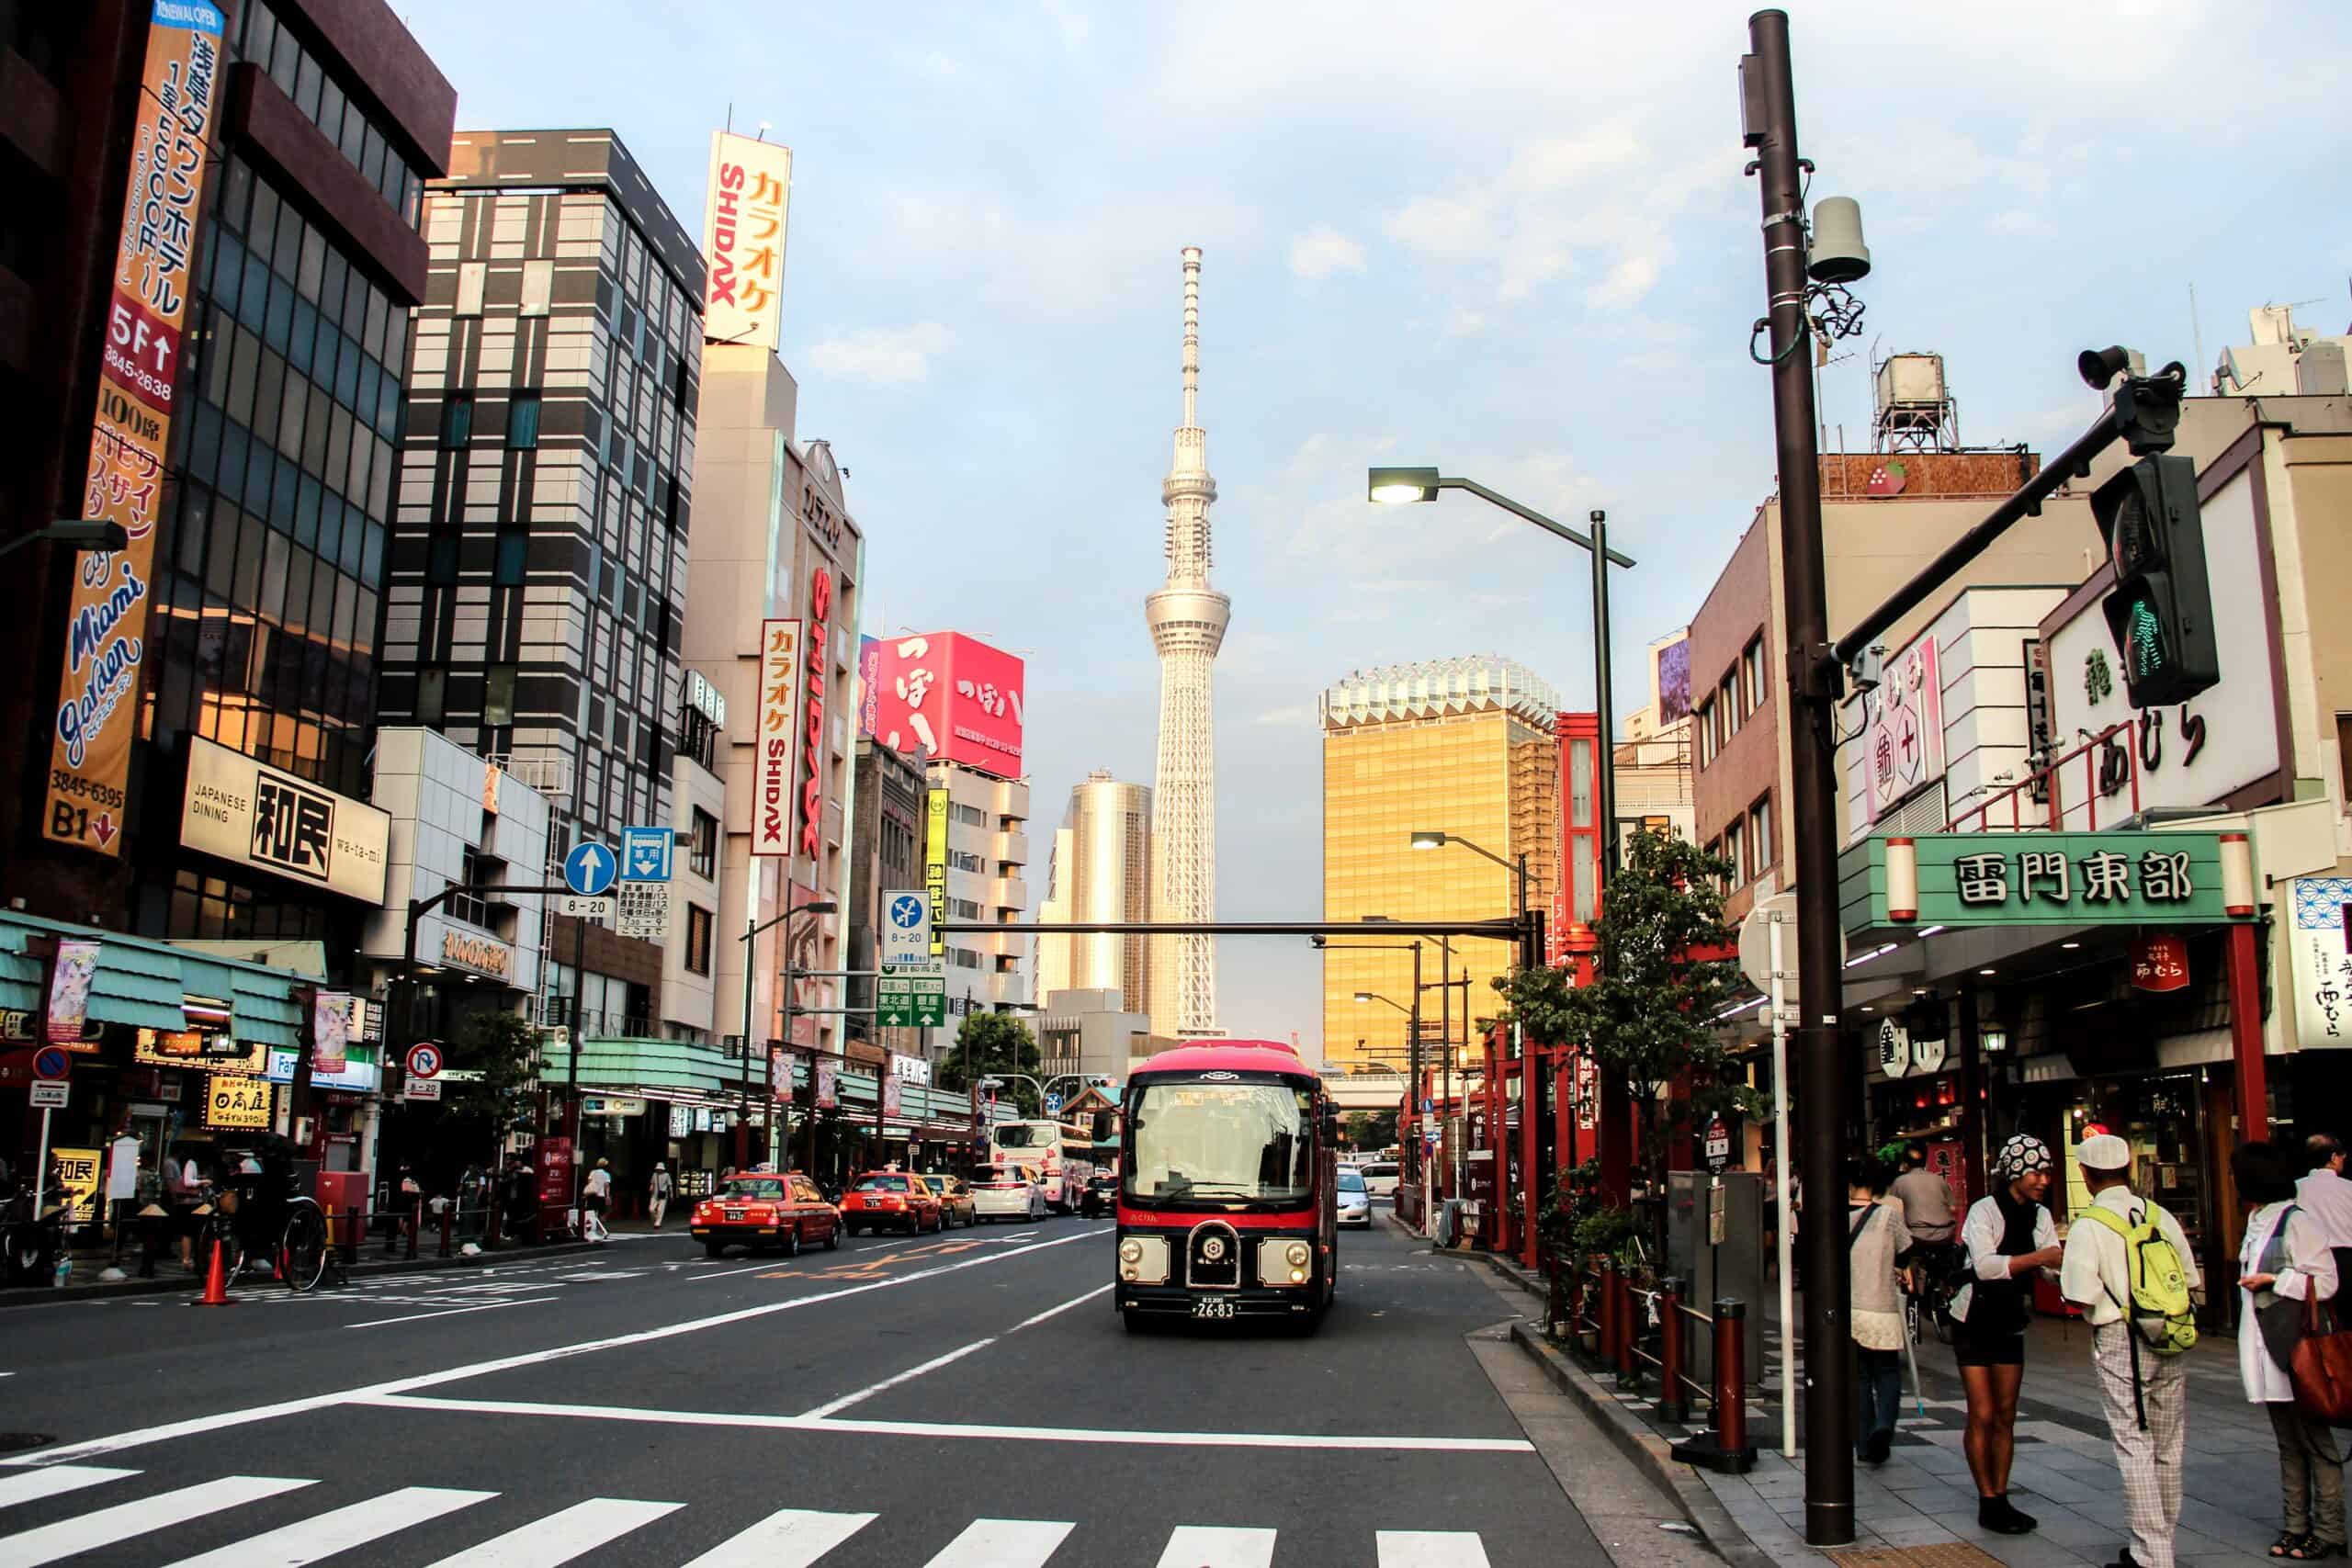 Main road in Tokyo with a bus on the road and the silver Tokyo Skytree tower in the background.